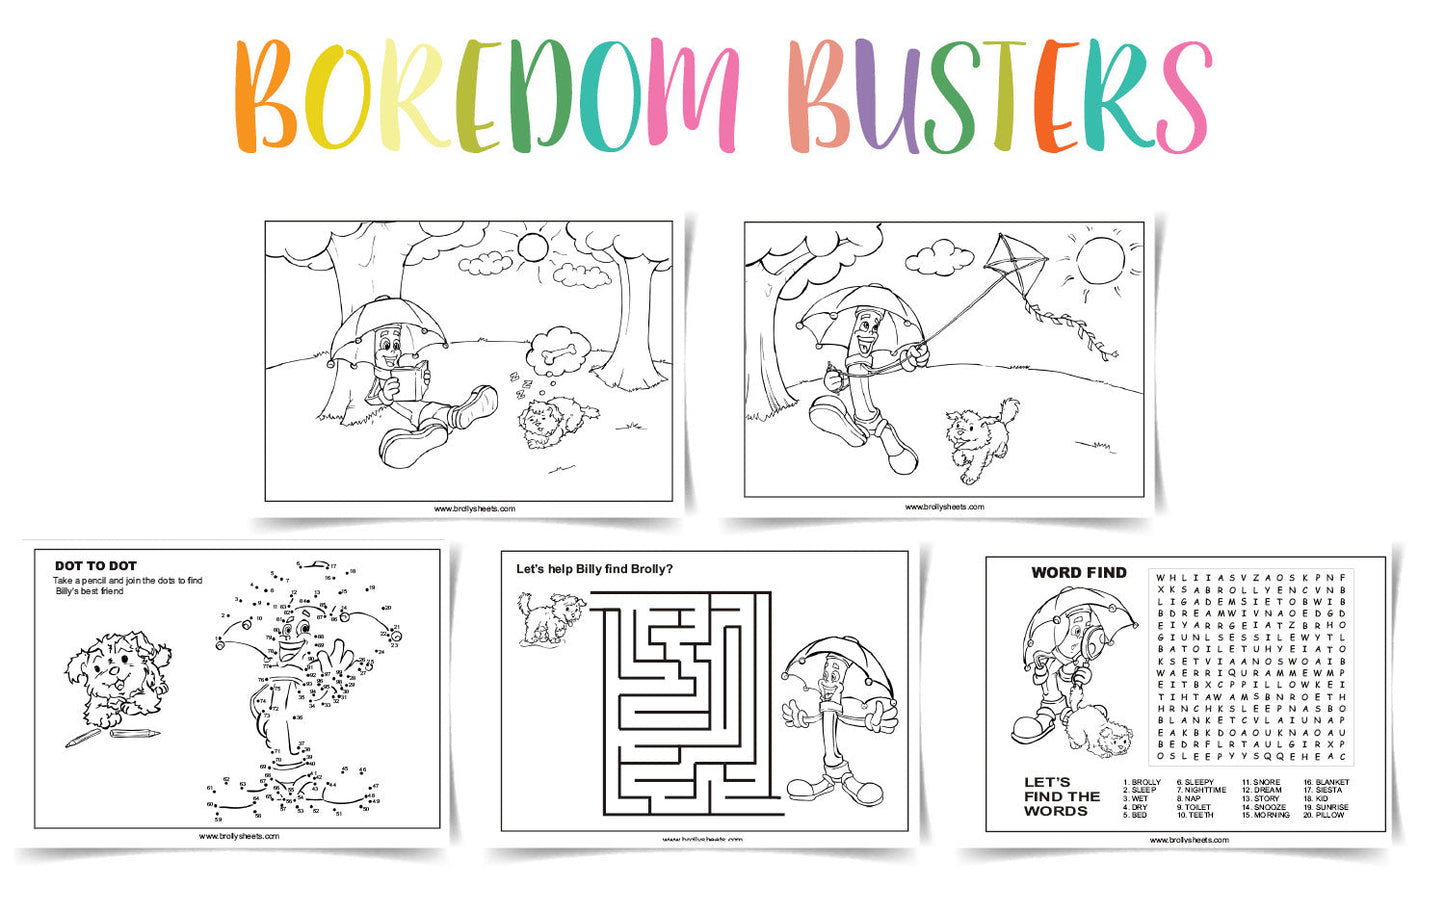 Boredom Busters - Brolly Sheets NZ